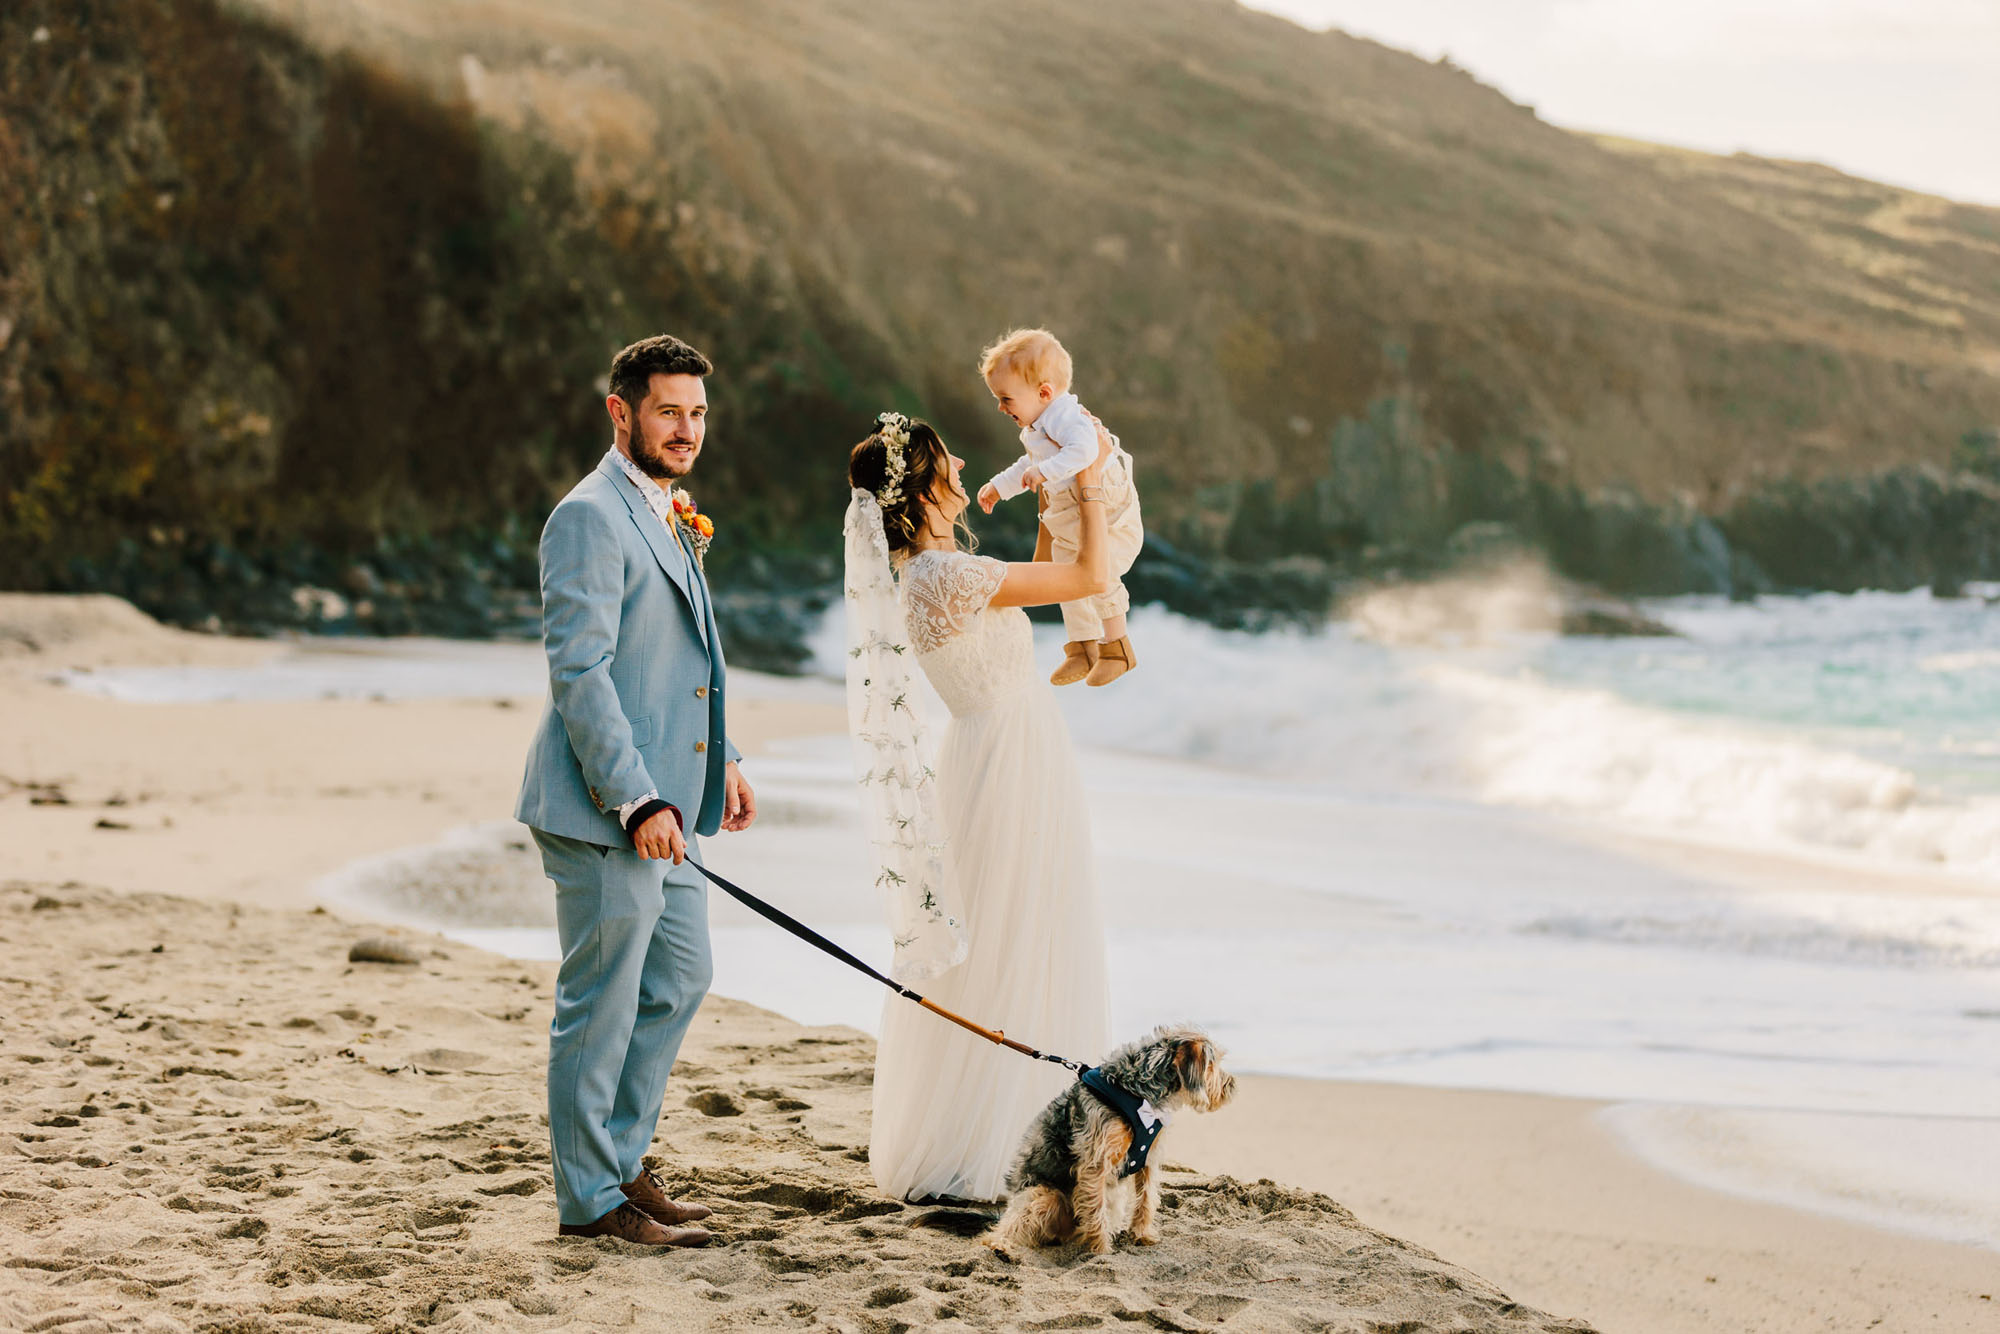 Beautiful wedding day family photo on a beach. The groom holds their dog on a lead, and the bride lifts their toddler into the air. They're on a sandy beach with cliffs behind. By Chris Armstrong Photography in Cornwall